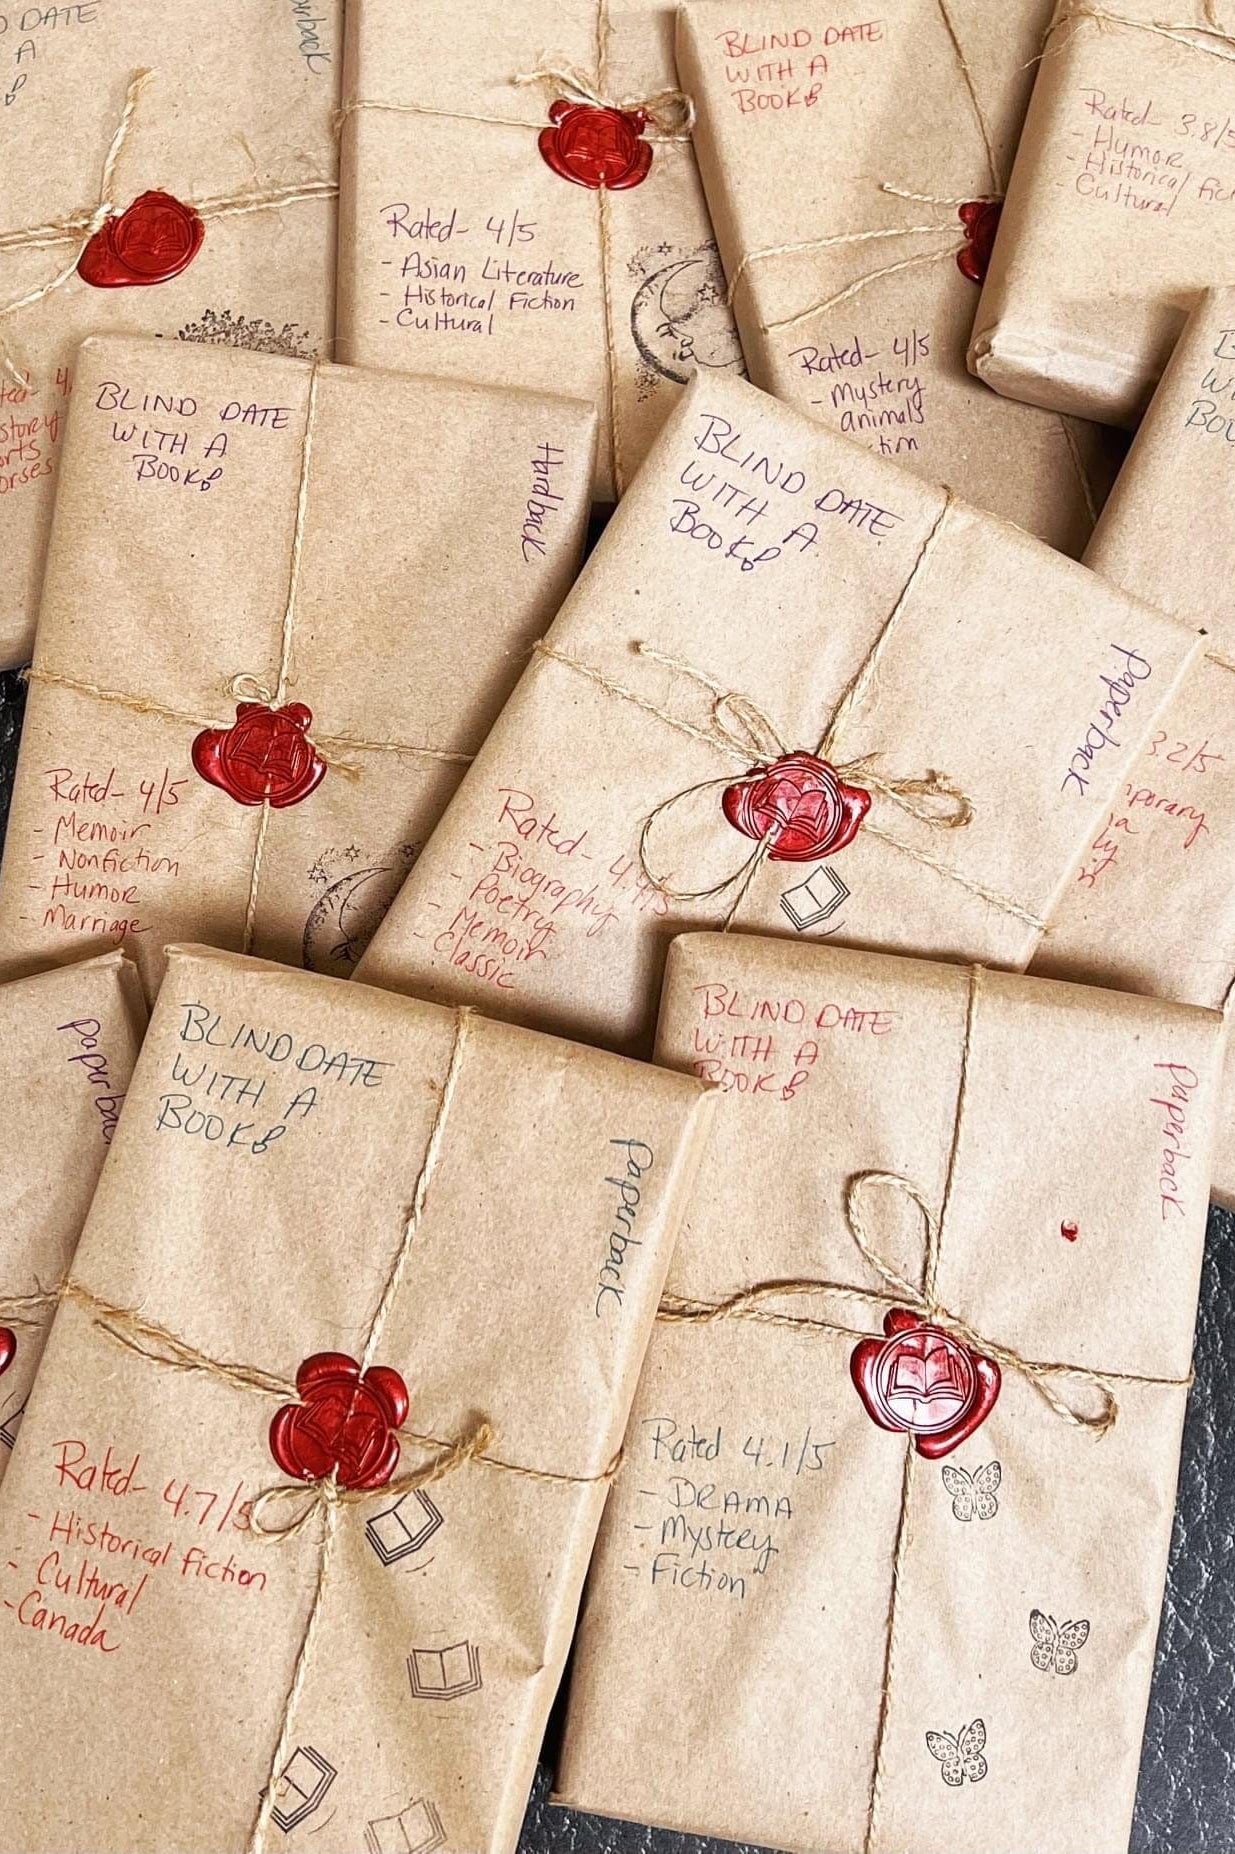 Blind Date With A Book-Stay Foxy Boutique, Florissant, Missouri